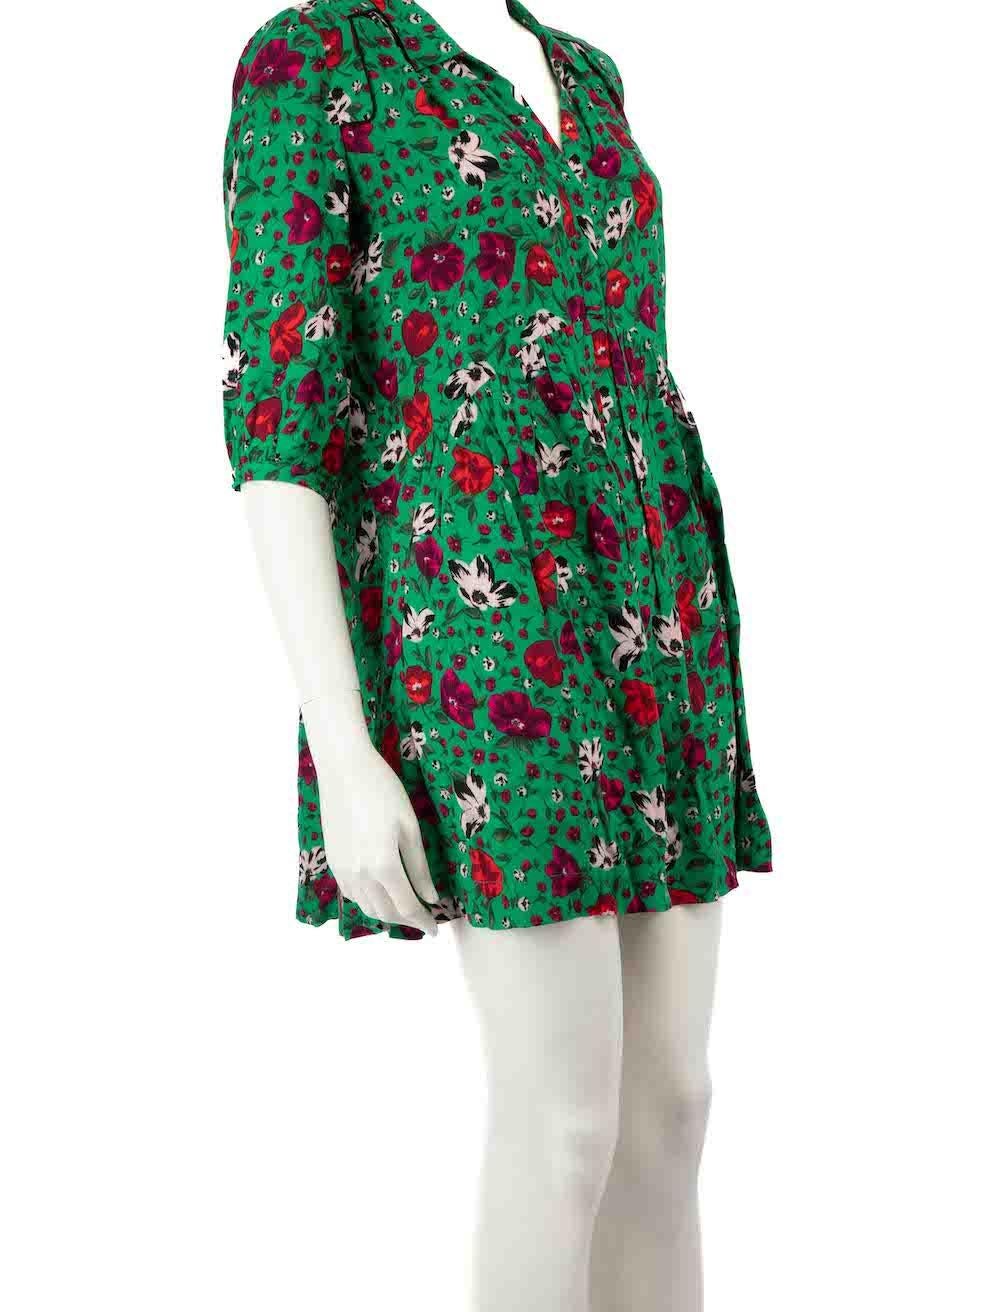 CONDITION is Very good. Hardly any visible wear to dress is evident on this used ba&shdesigner resale item.
 
 
 
 Details
 
 
 Green
 
 Viscose
 
 Dress
 
 Floral print
 
 Mini
 
 Snap button fastening
 
 
 
 
 
 Made in China
 
 
 
 Composition
 
